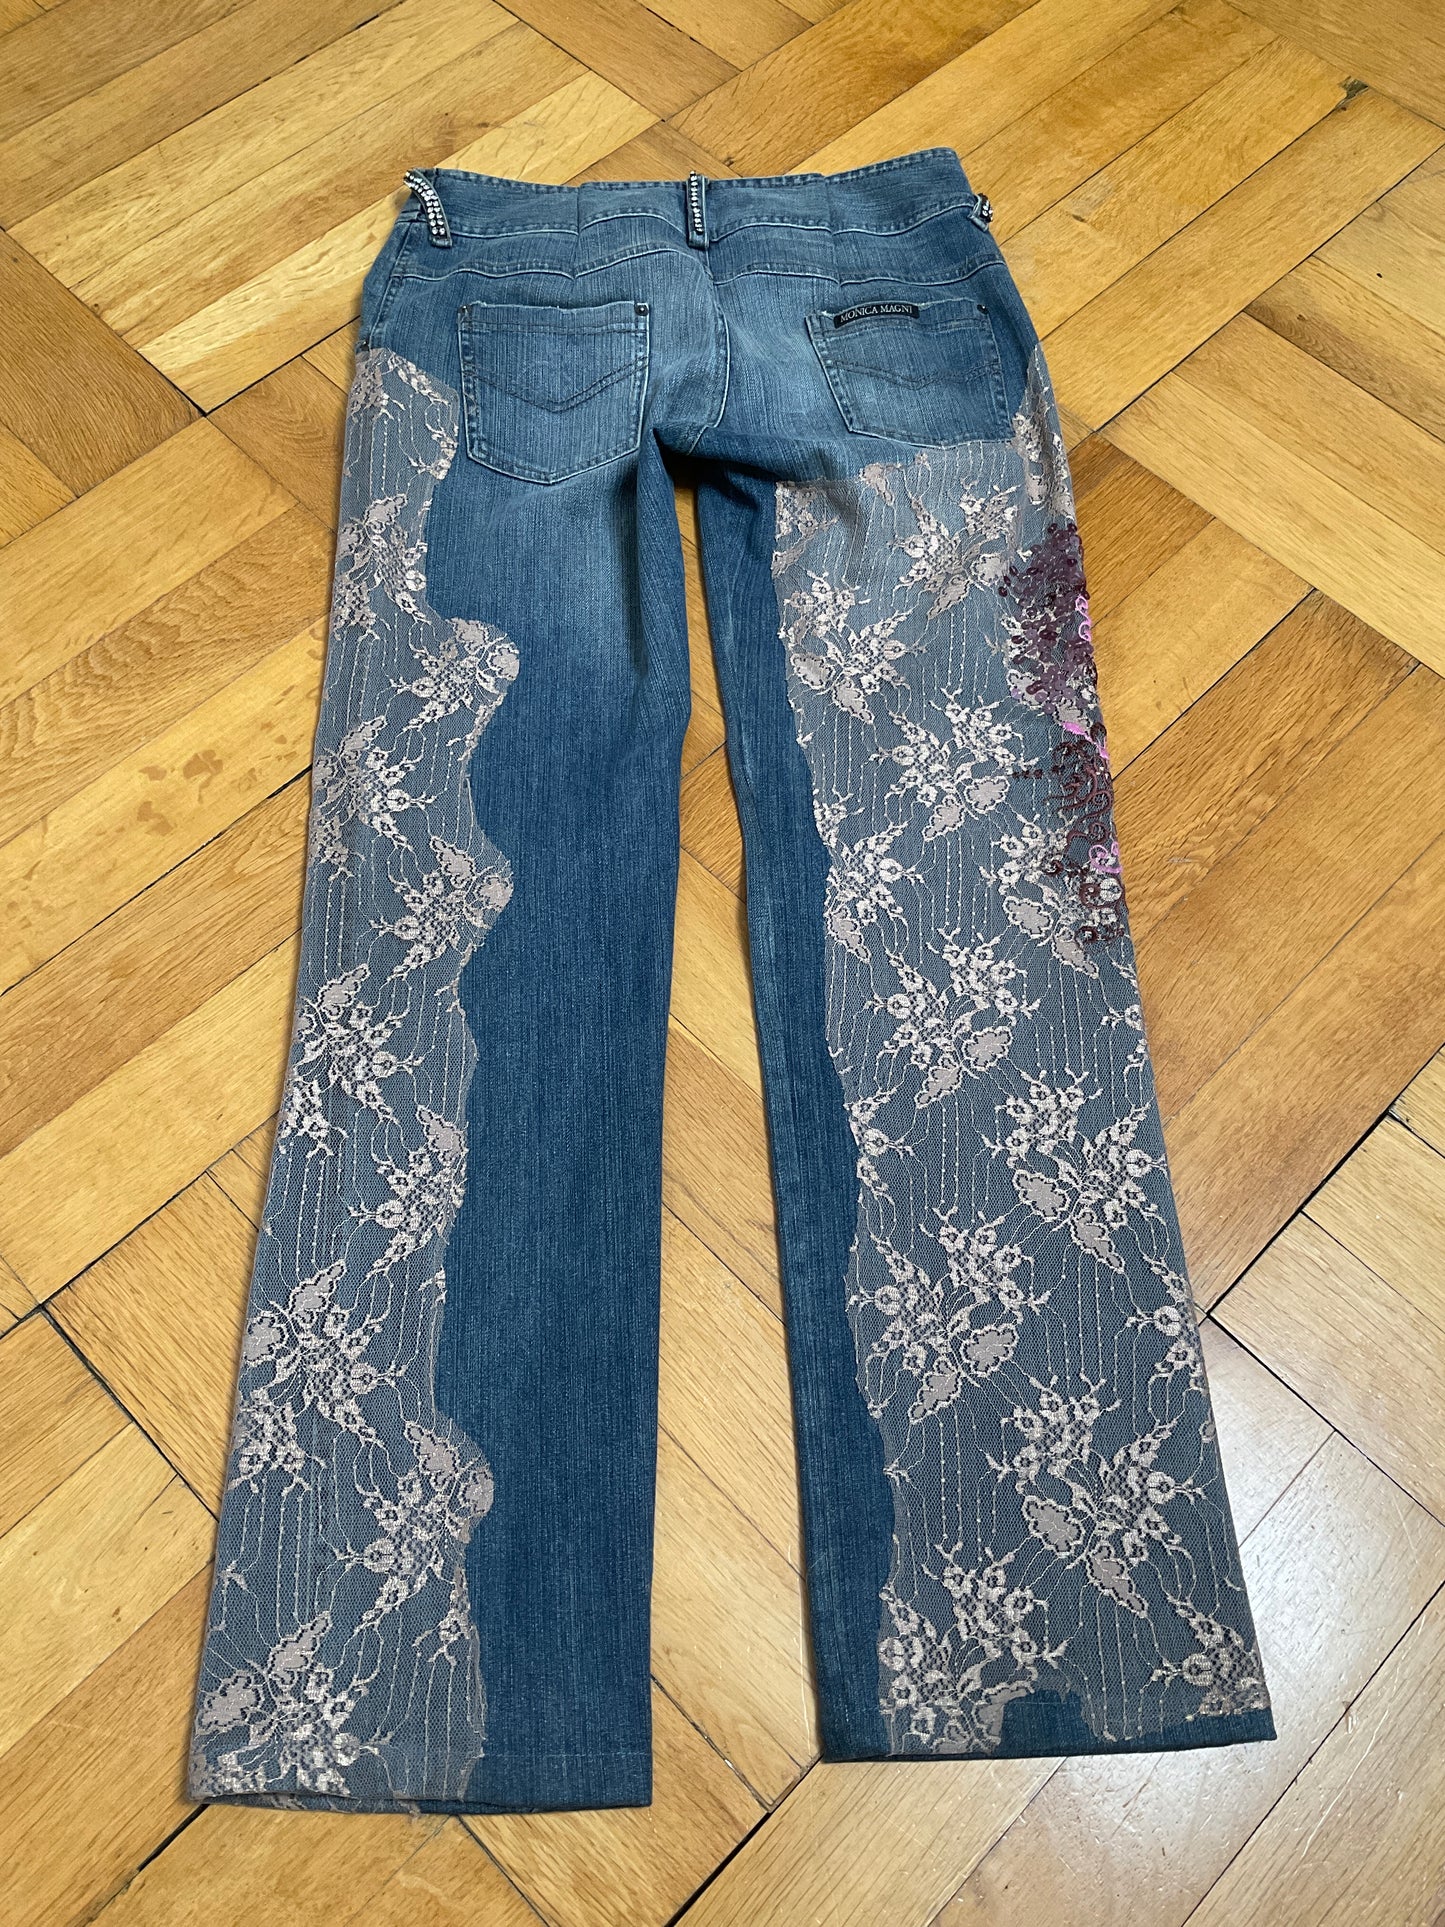 Jeans with embroidery and crystals